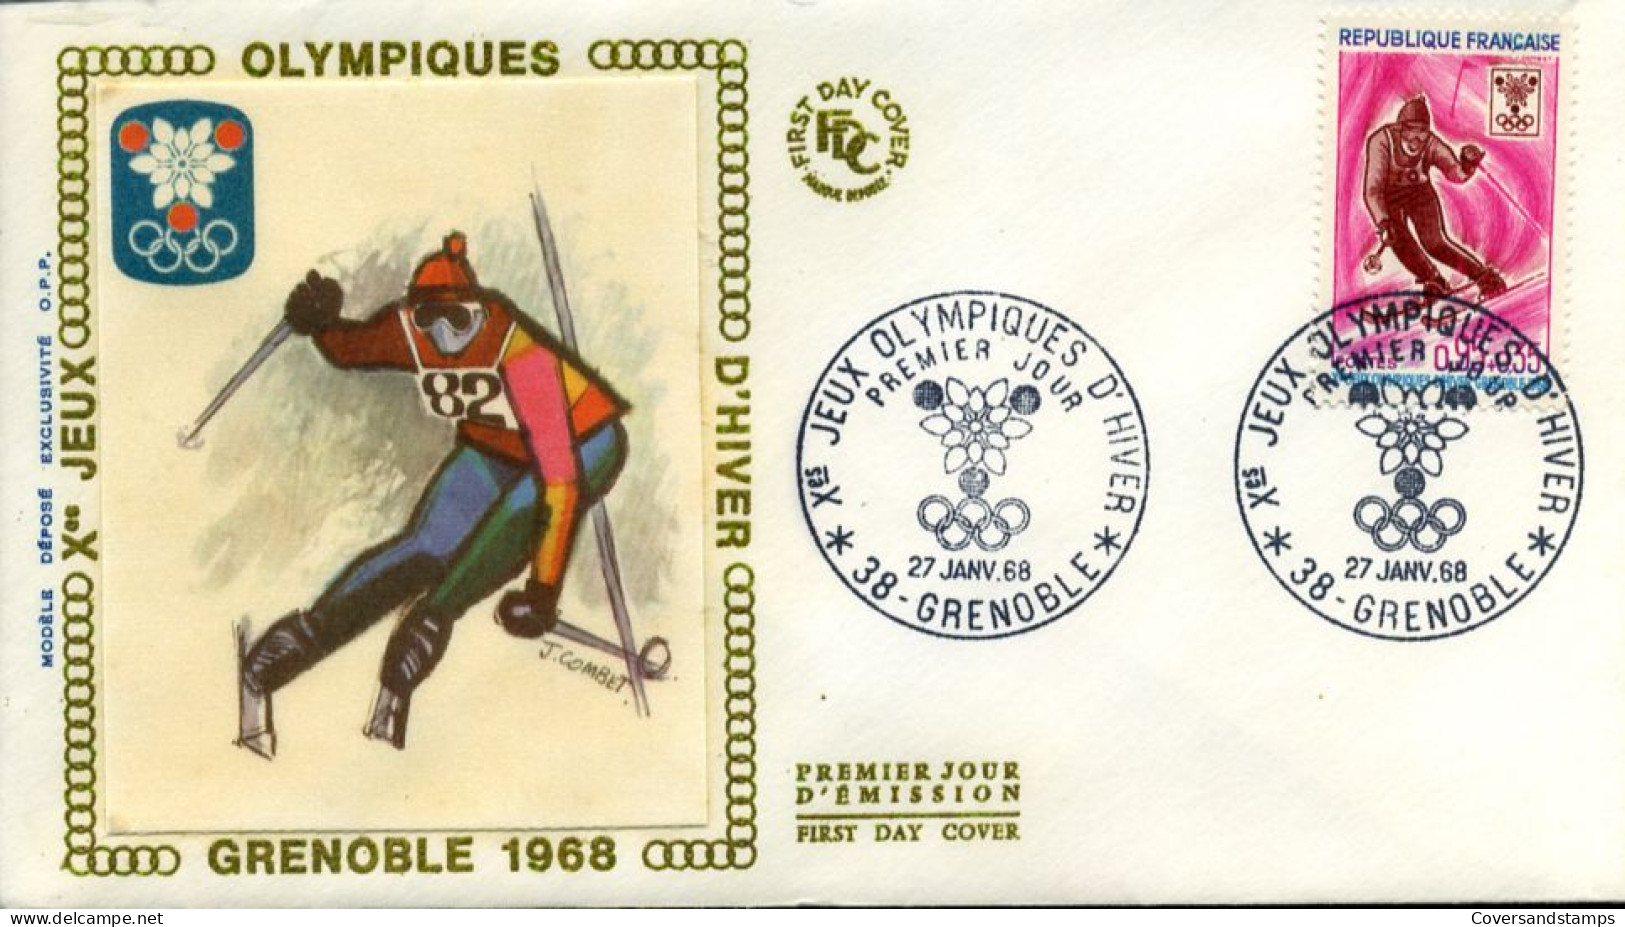 France - FDC -  1547 - Jeux Olympiques Grenoble 1968 - 1960-1969